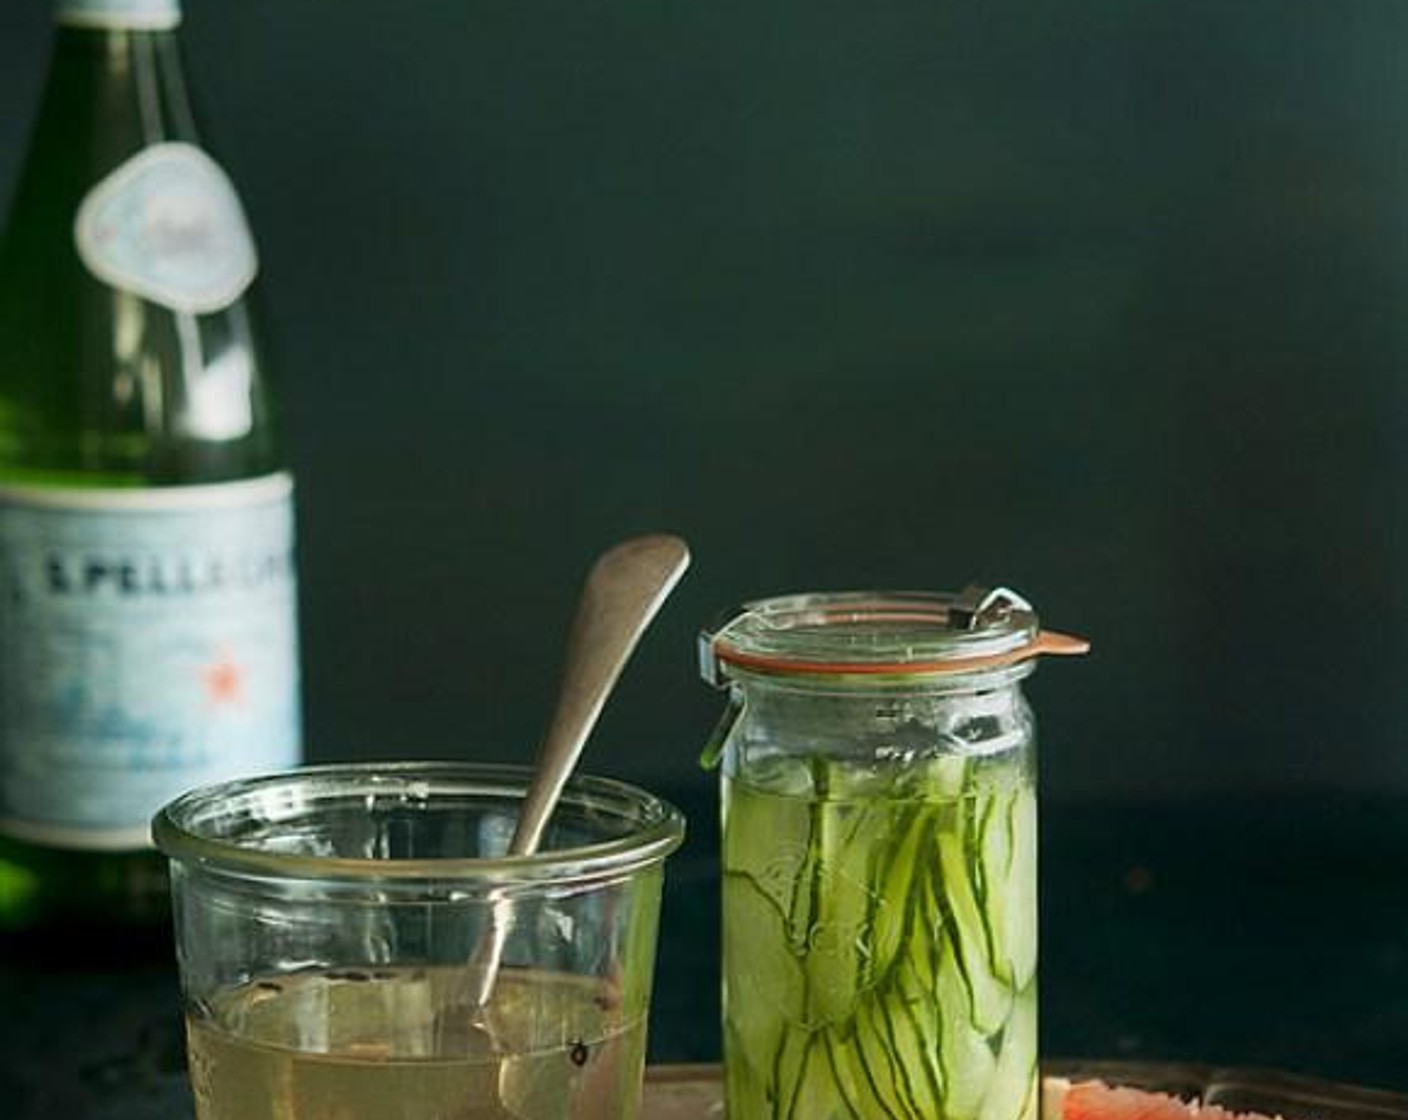 step 1 Place English Cucumber (1/2) in a small pitcher or jam jar. Mash with a muddling tool or a wooden spoon until cucumbers release juices. Add Gin (2 cups), cover, and refrigerate at least 12 hours and up to 3 days.